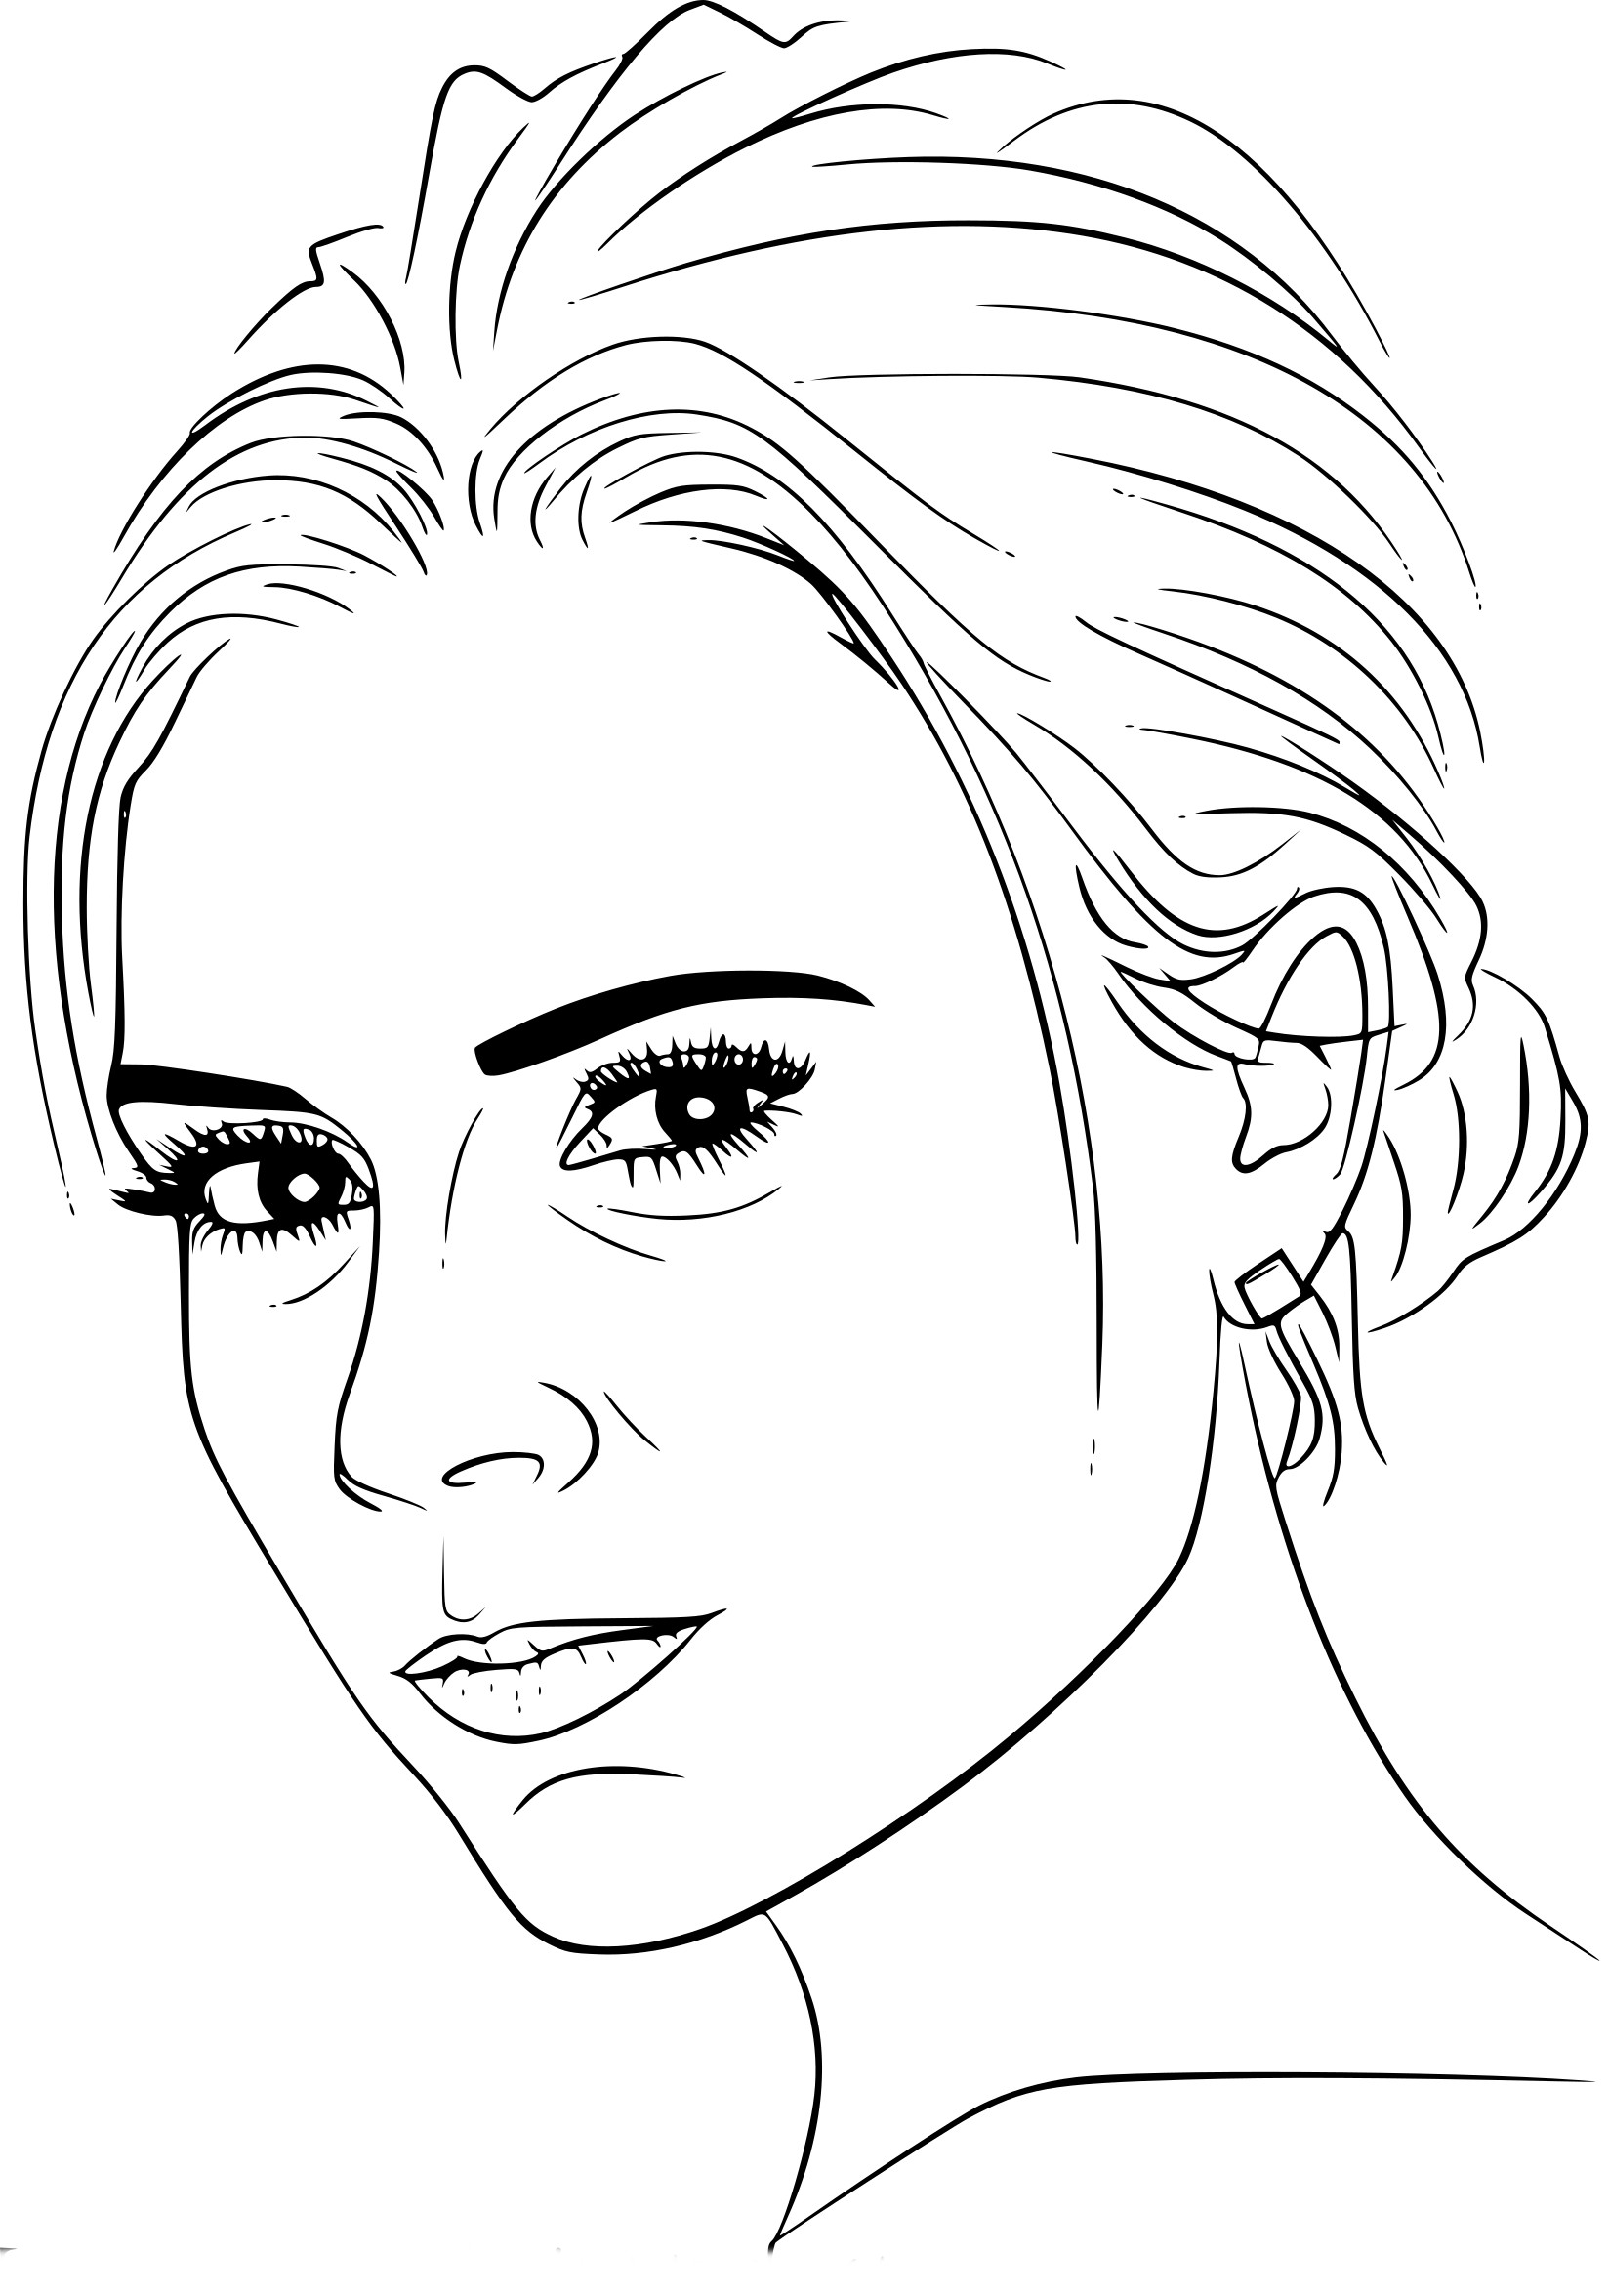 Victoria Beckham coloring page